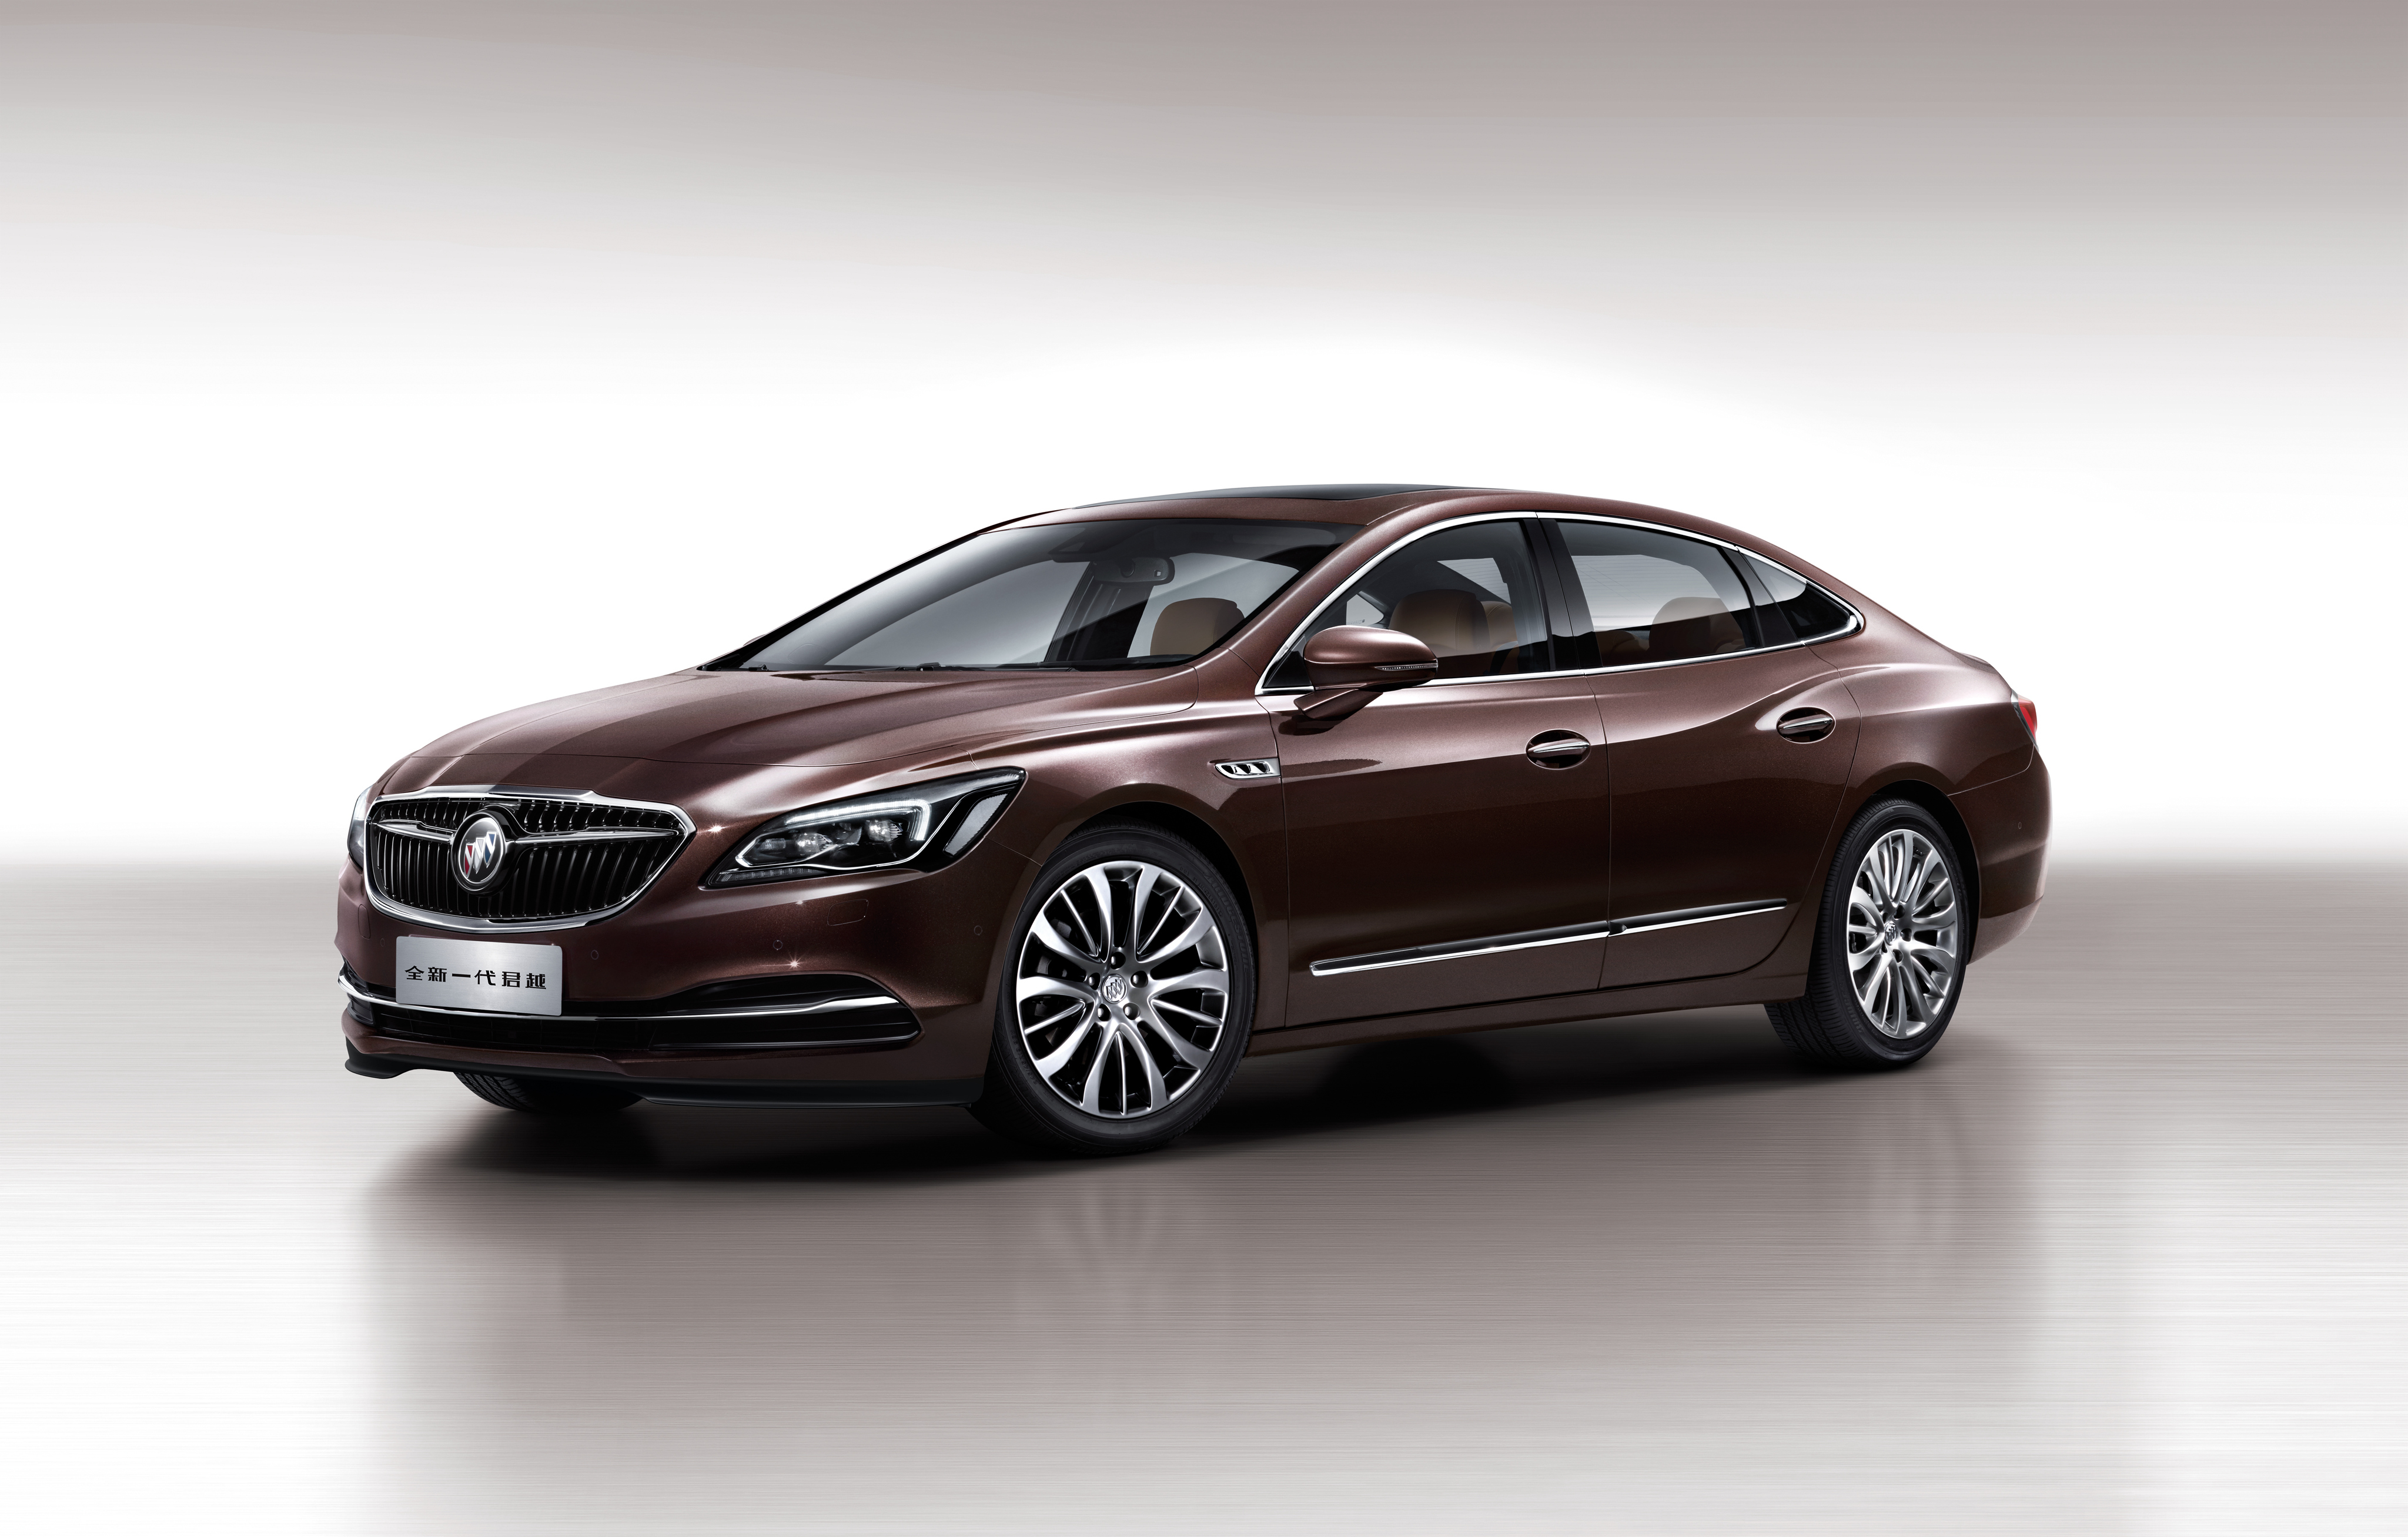 Vehicles Buick LaCrosse HD Wallpaper | Background Image